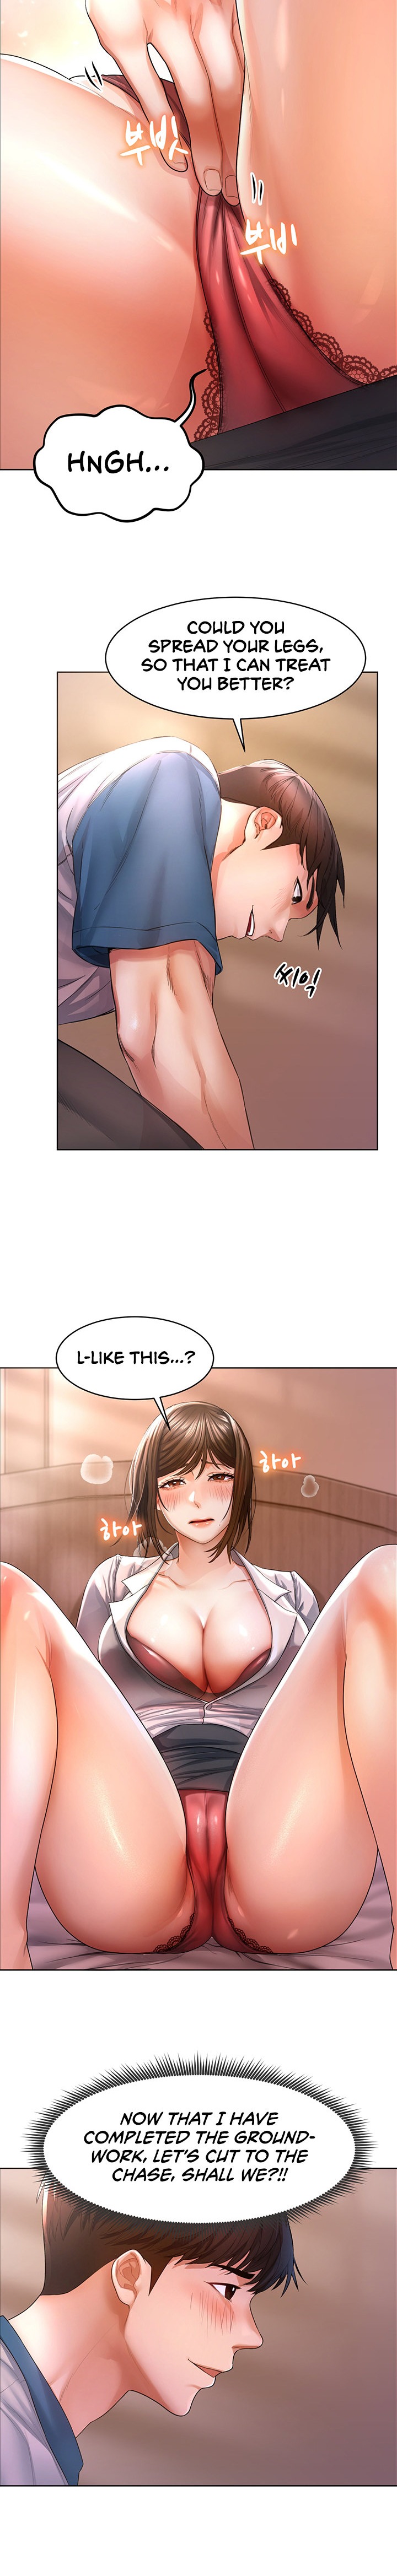 Could You Please Touch Me There? - Chapter 2 Page 6